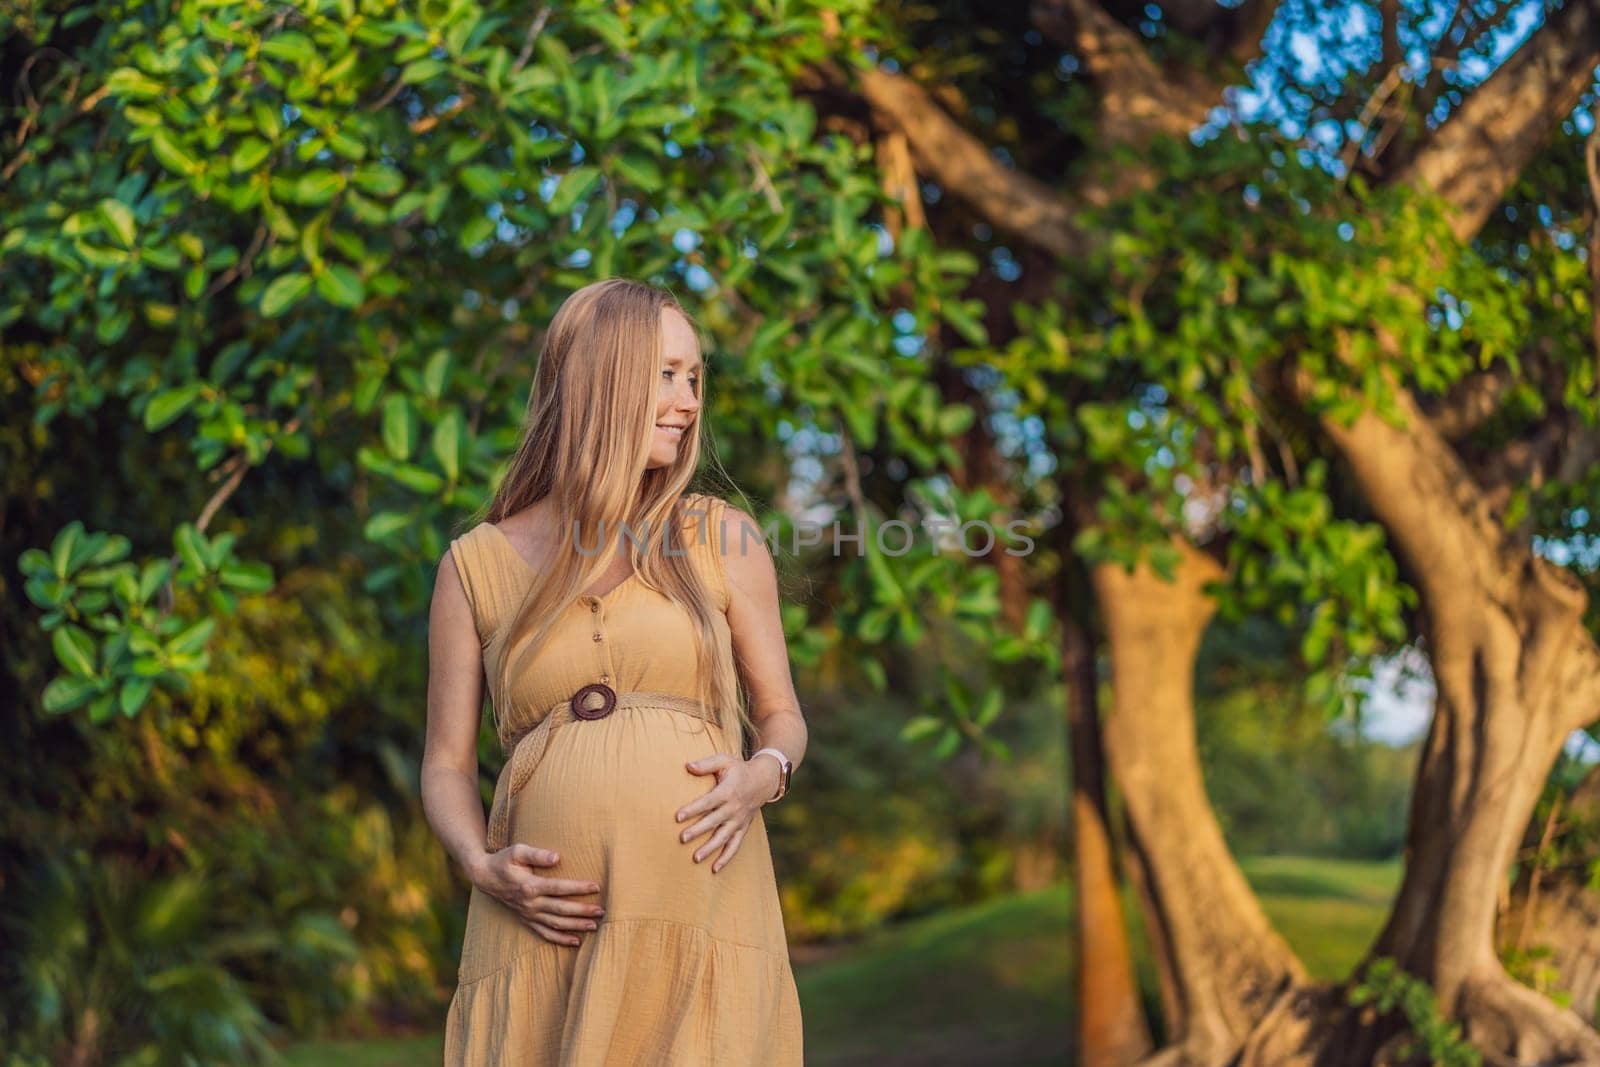 pregnant woman finds joy and serenity, relishing a tranquil moment outdoors during her pregnancy journey.